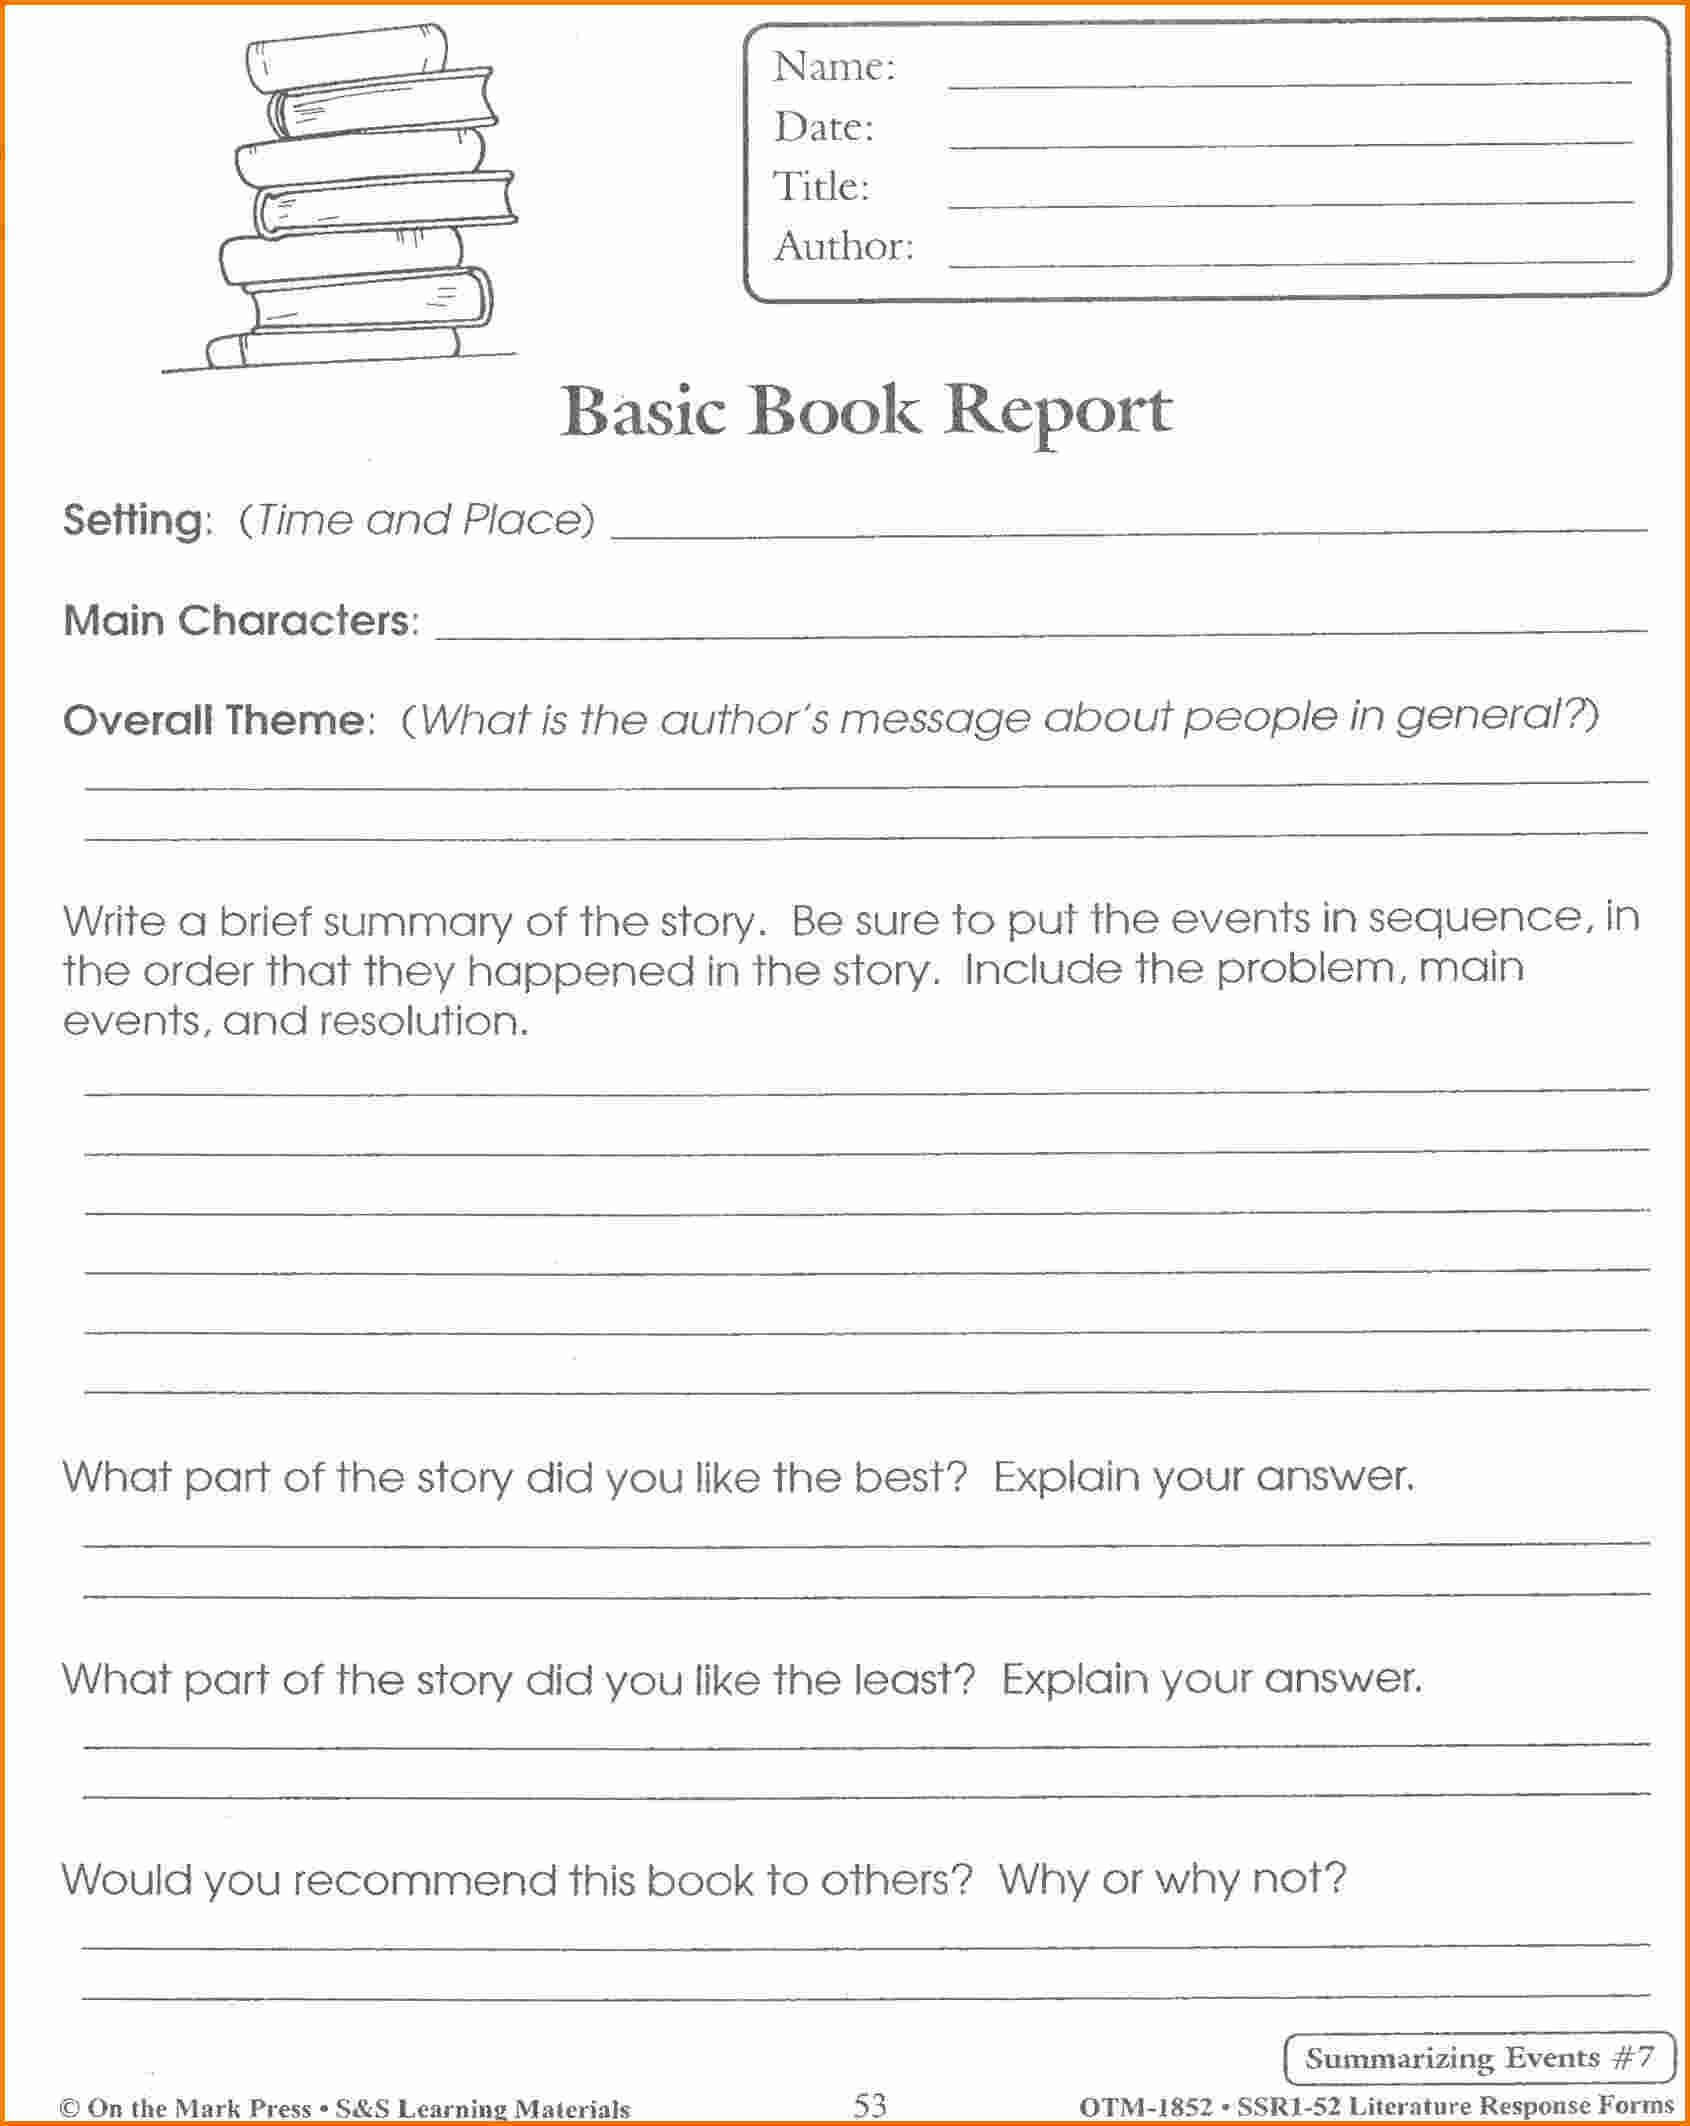 Pinmarcus Tong On Book | Book Report Templates, Book For Book Report Template 5Th Grade